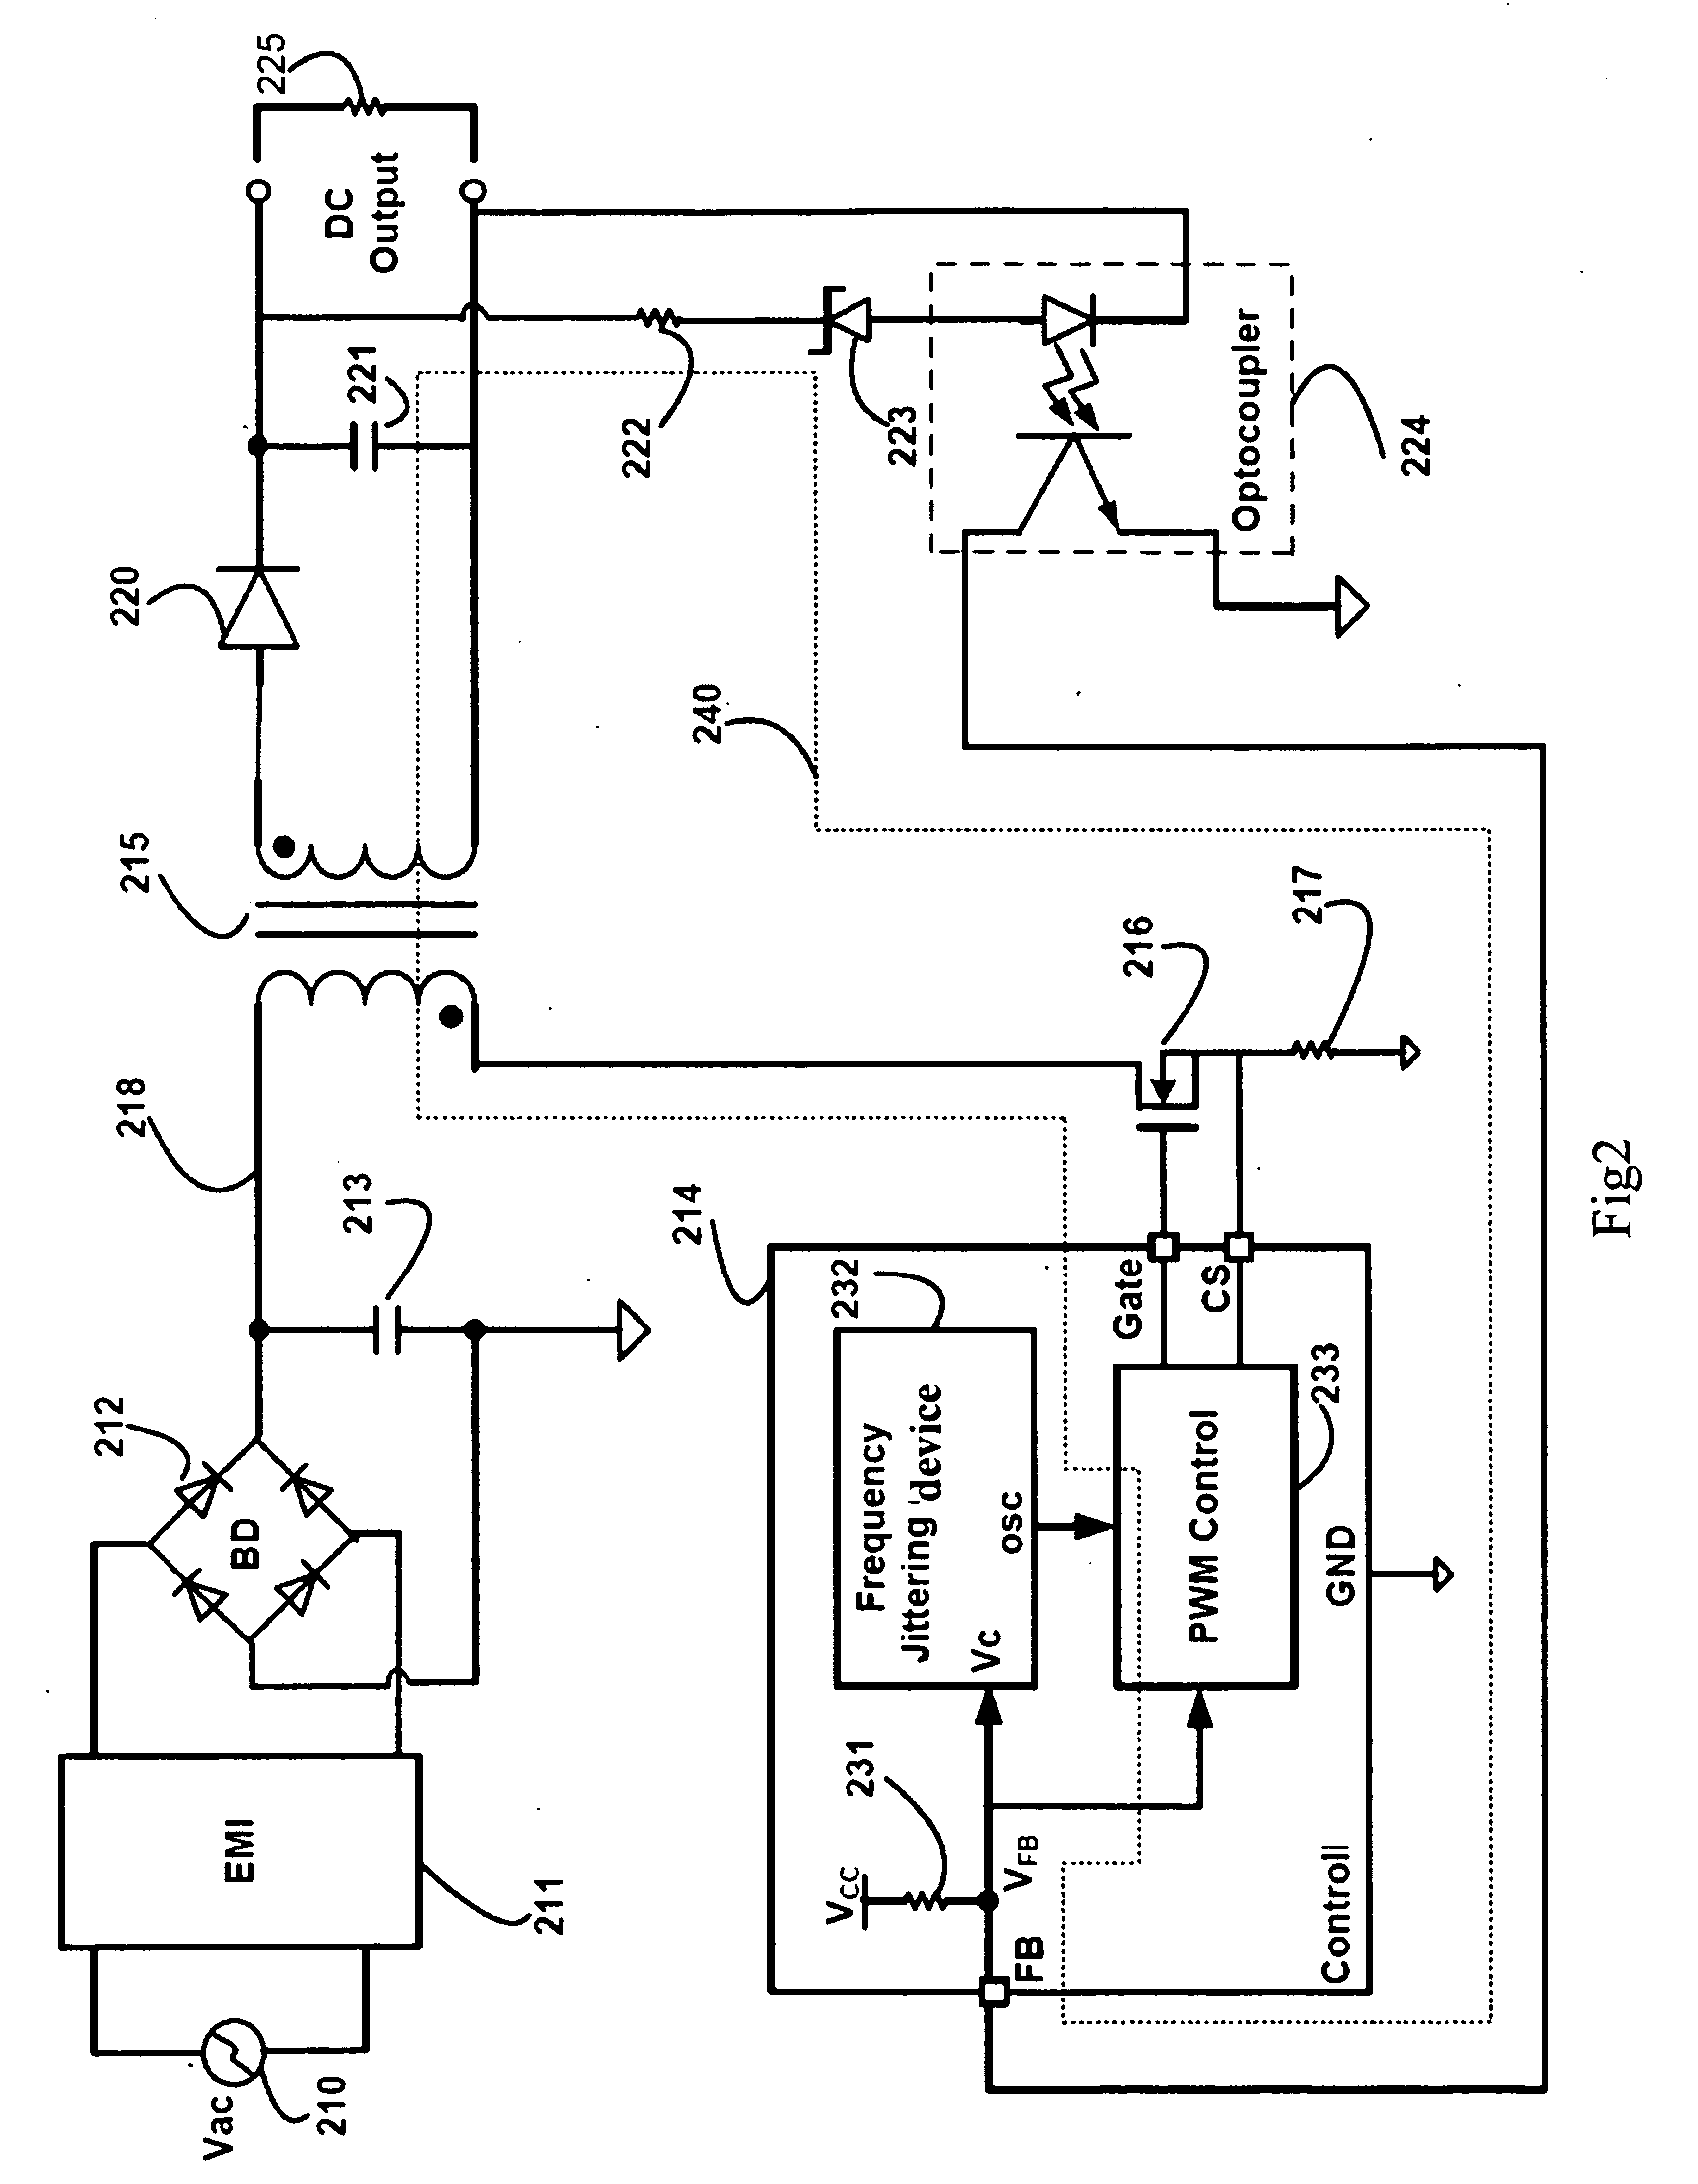 Load adaptive EMI reduction scheme for switching mode power supply